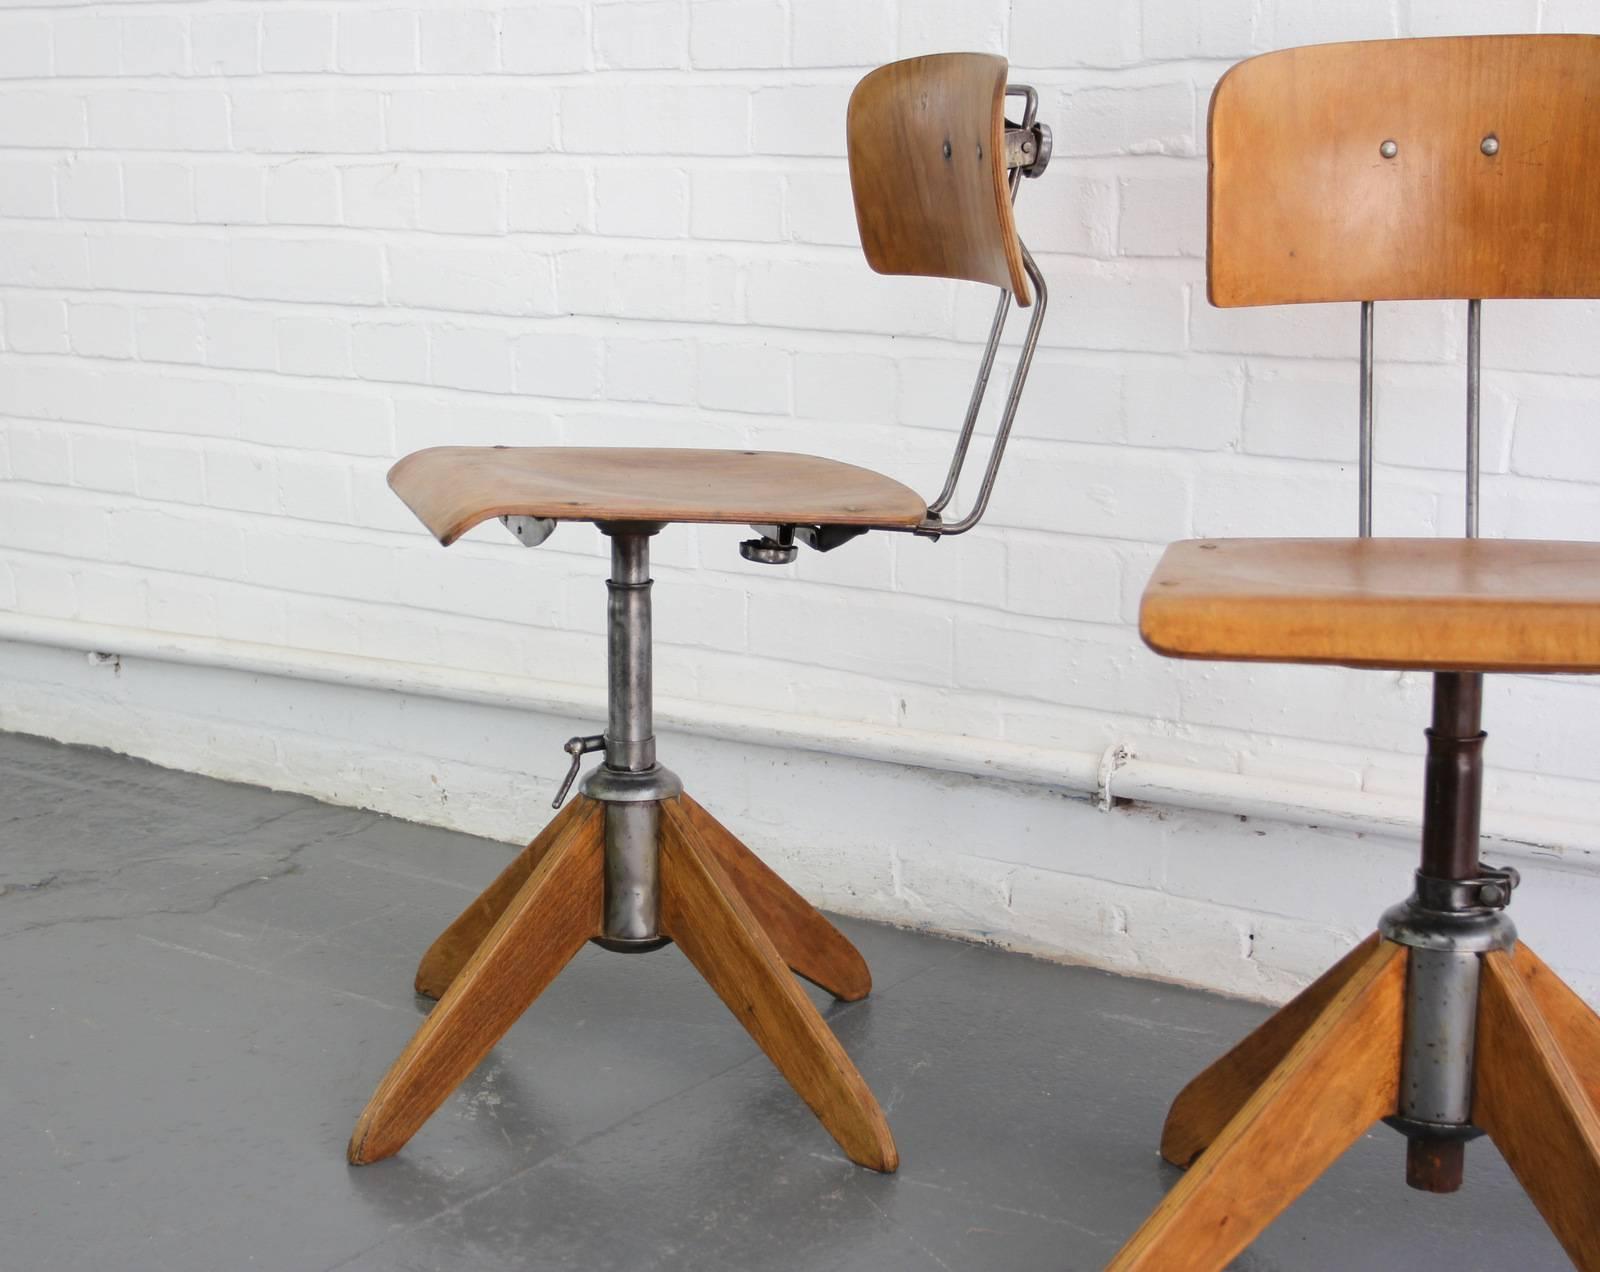 Industrial work stools by Robert Wagner for Rowac, circa 1940s

- Price is per chair (two available)
- Sprung backrest and seat
- Height adjustable
- Adjustable backrest
- German, circa 1940s
- Measures: 38cm wide x 50cm deep x 81cm tall
-